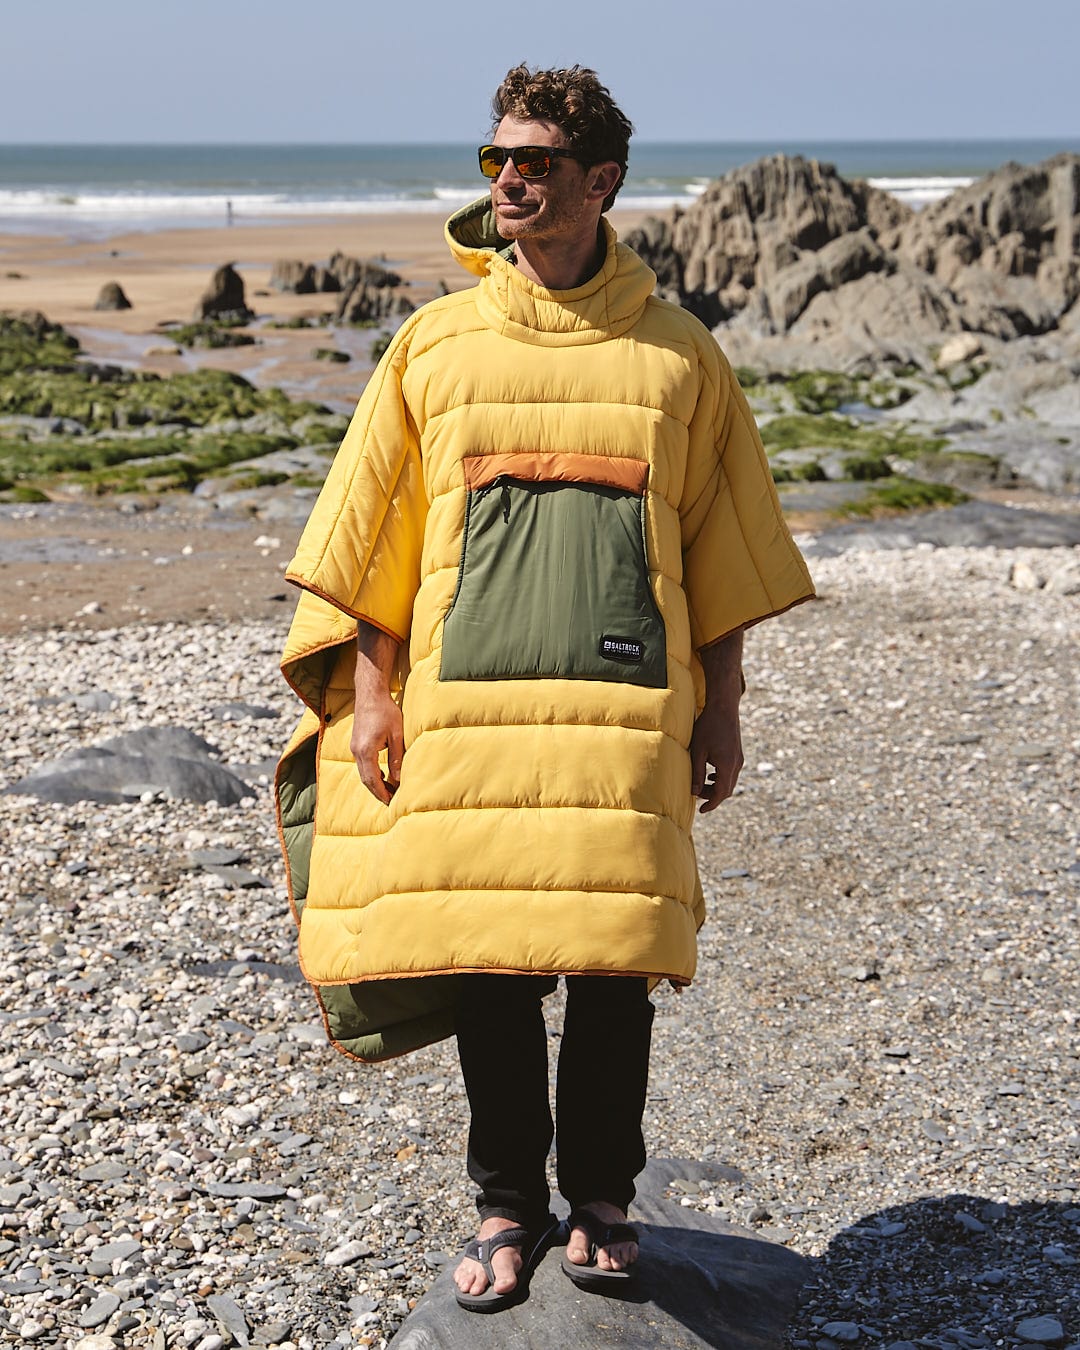 A man in a Sunset - Packable Reversible Poncho - Yellow by Saltrock standing on the beach.